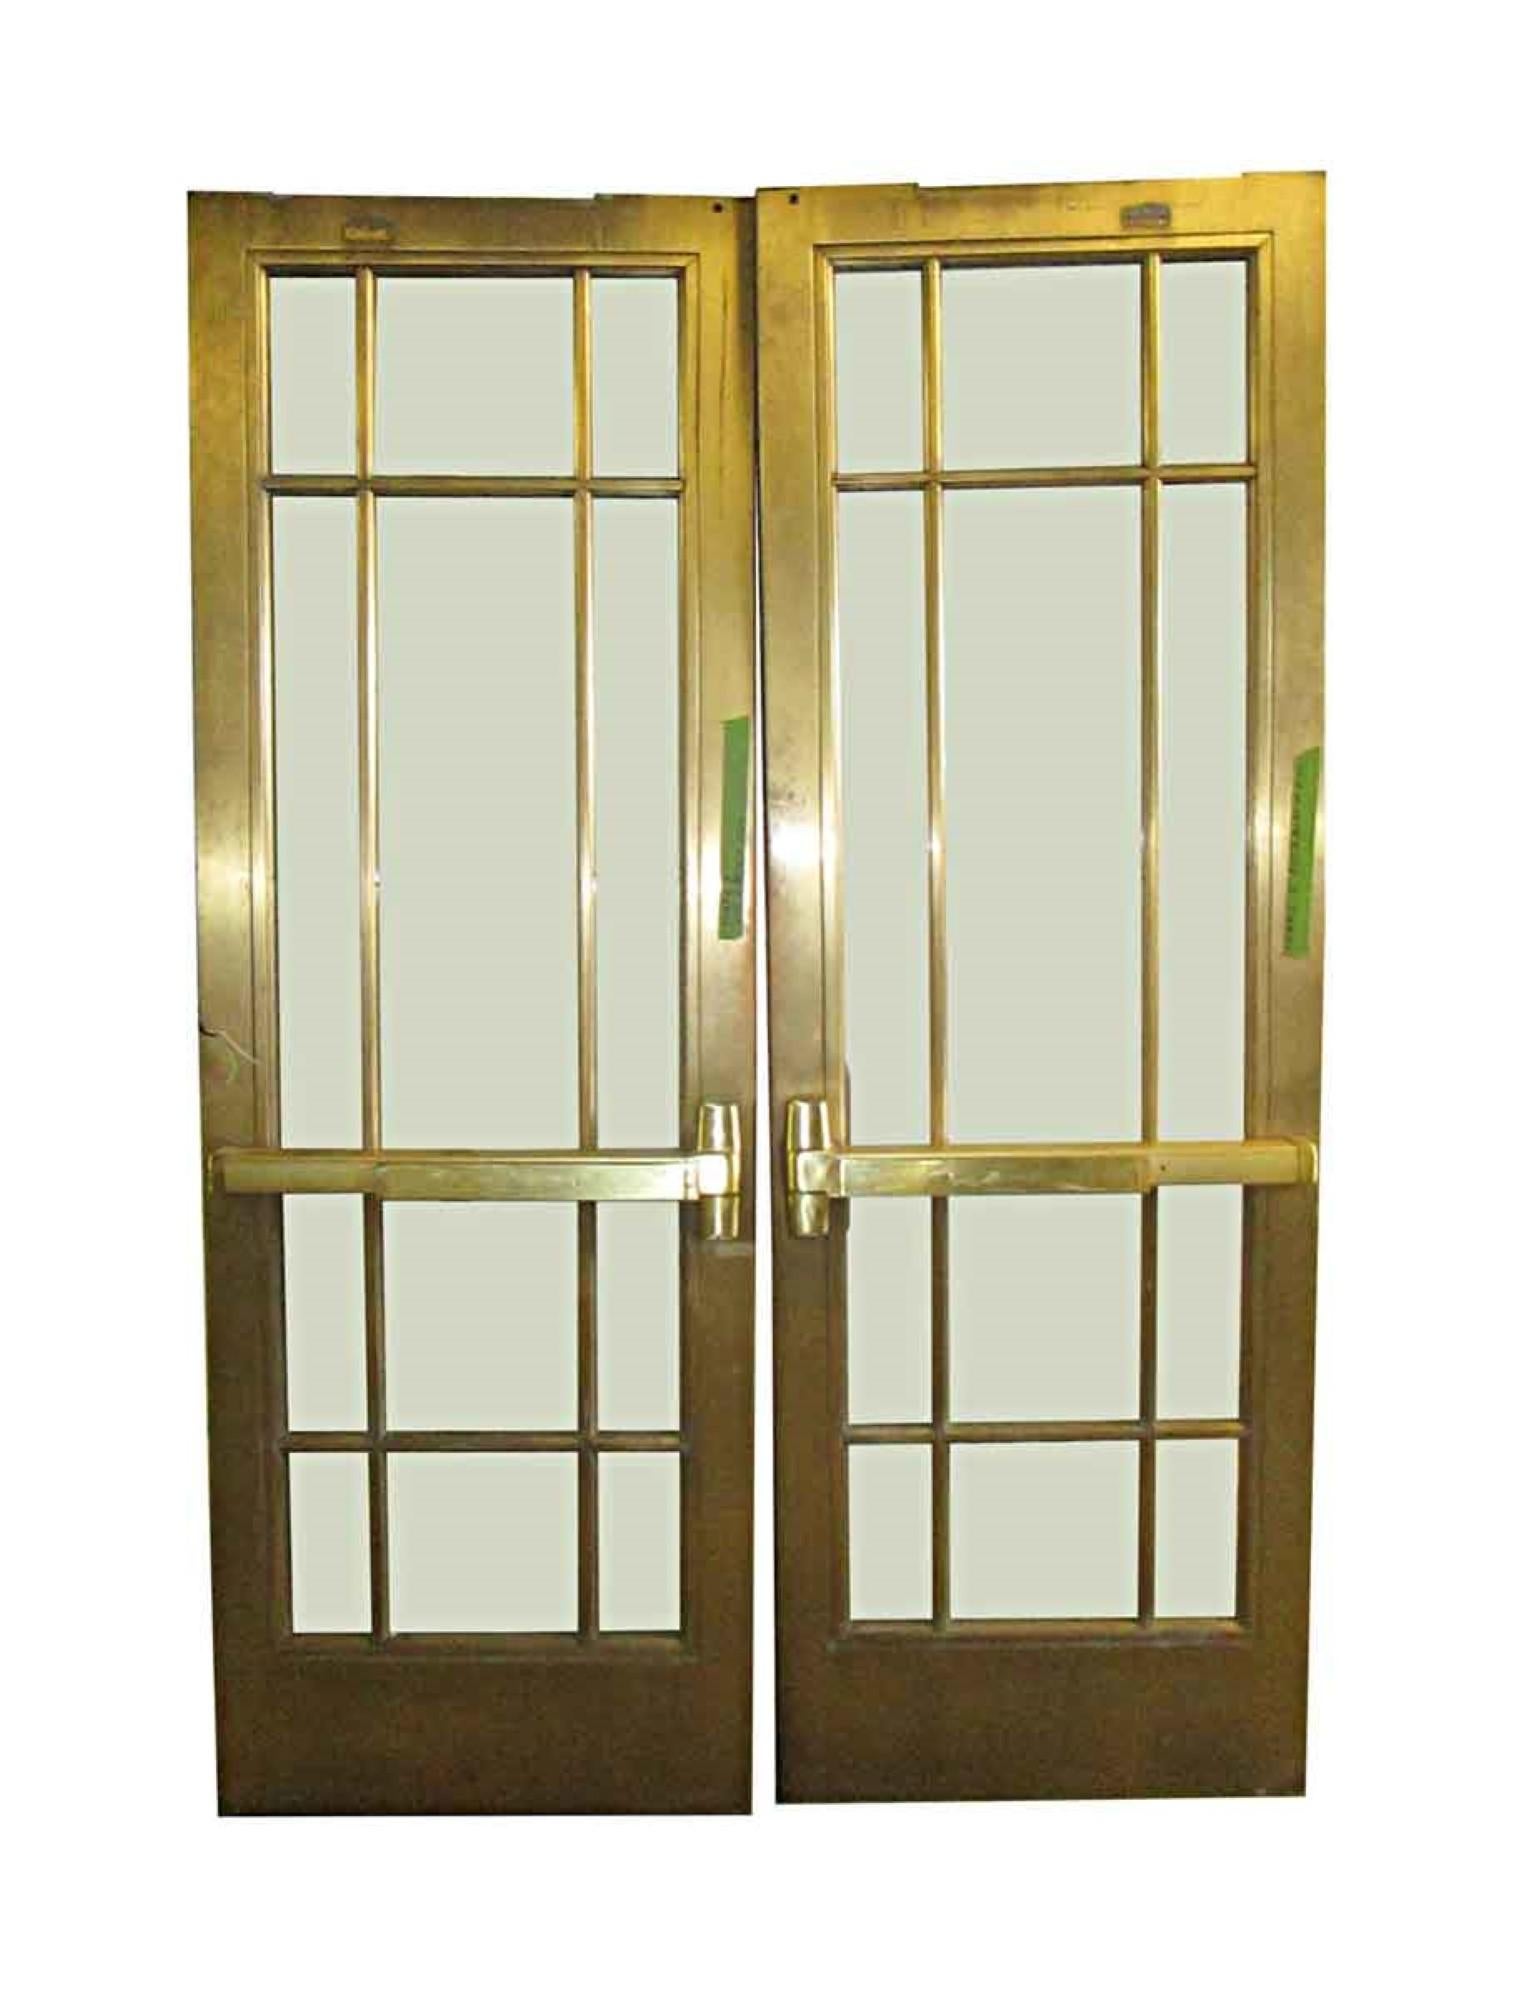 American 1920s Pair of Antique Brass Entryway French Doors with 9 Lites Each